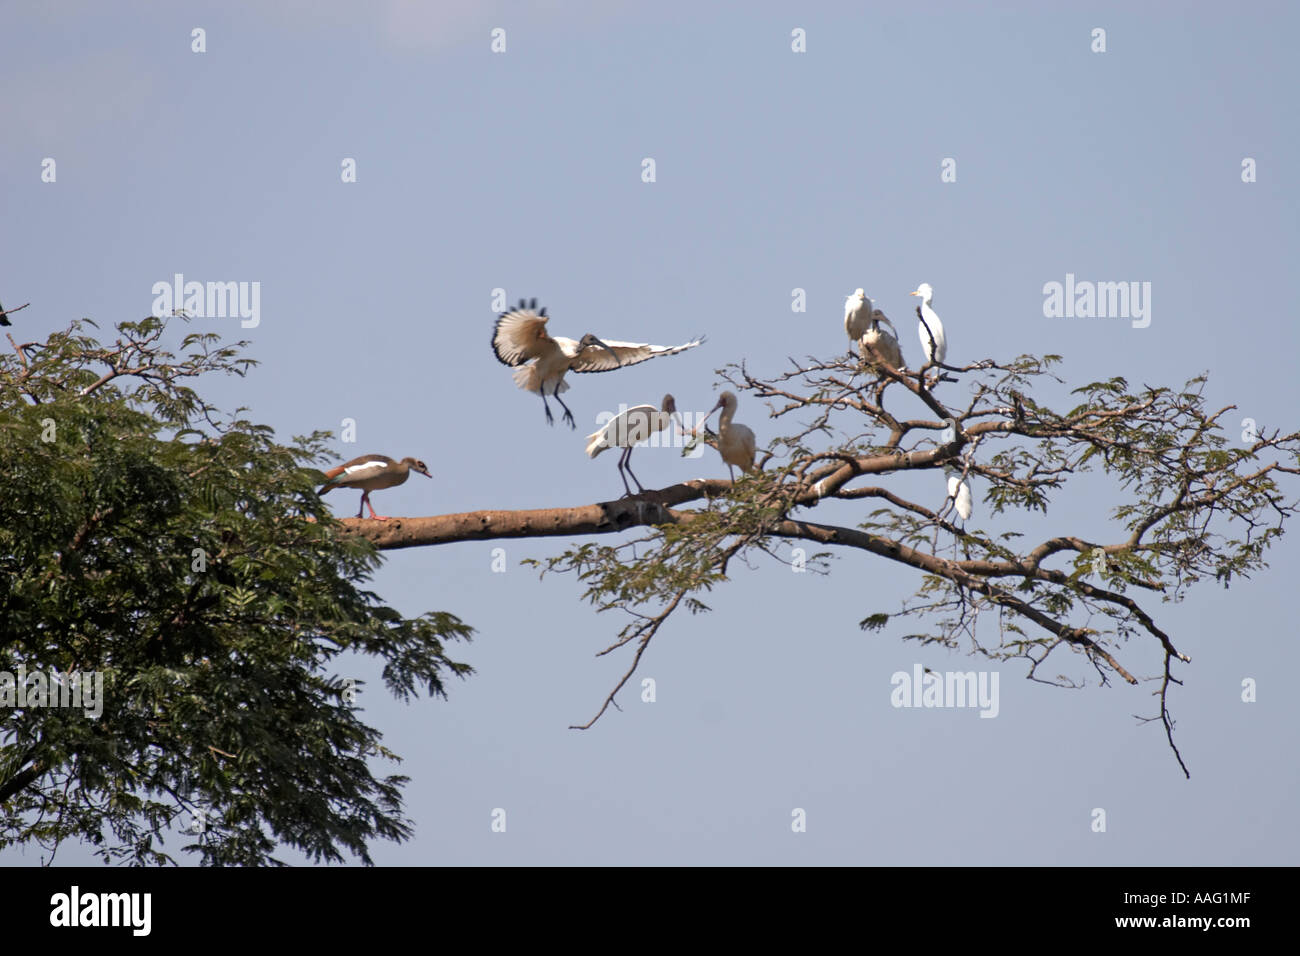 Egyptian goose with Sacred ibis landing Spoonbill and Cattle egrets in a tree near Kuch Ethiopia Africa Stock Photo